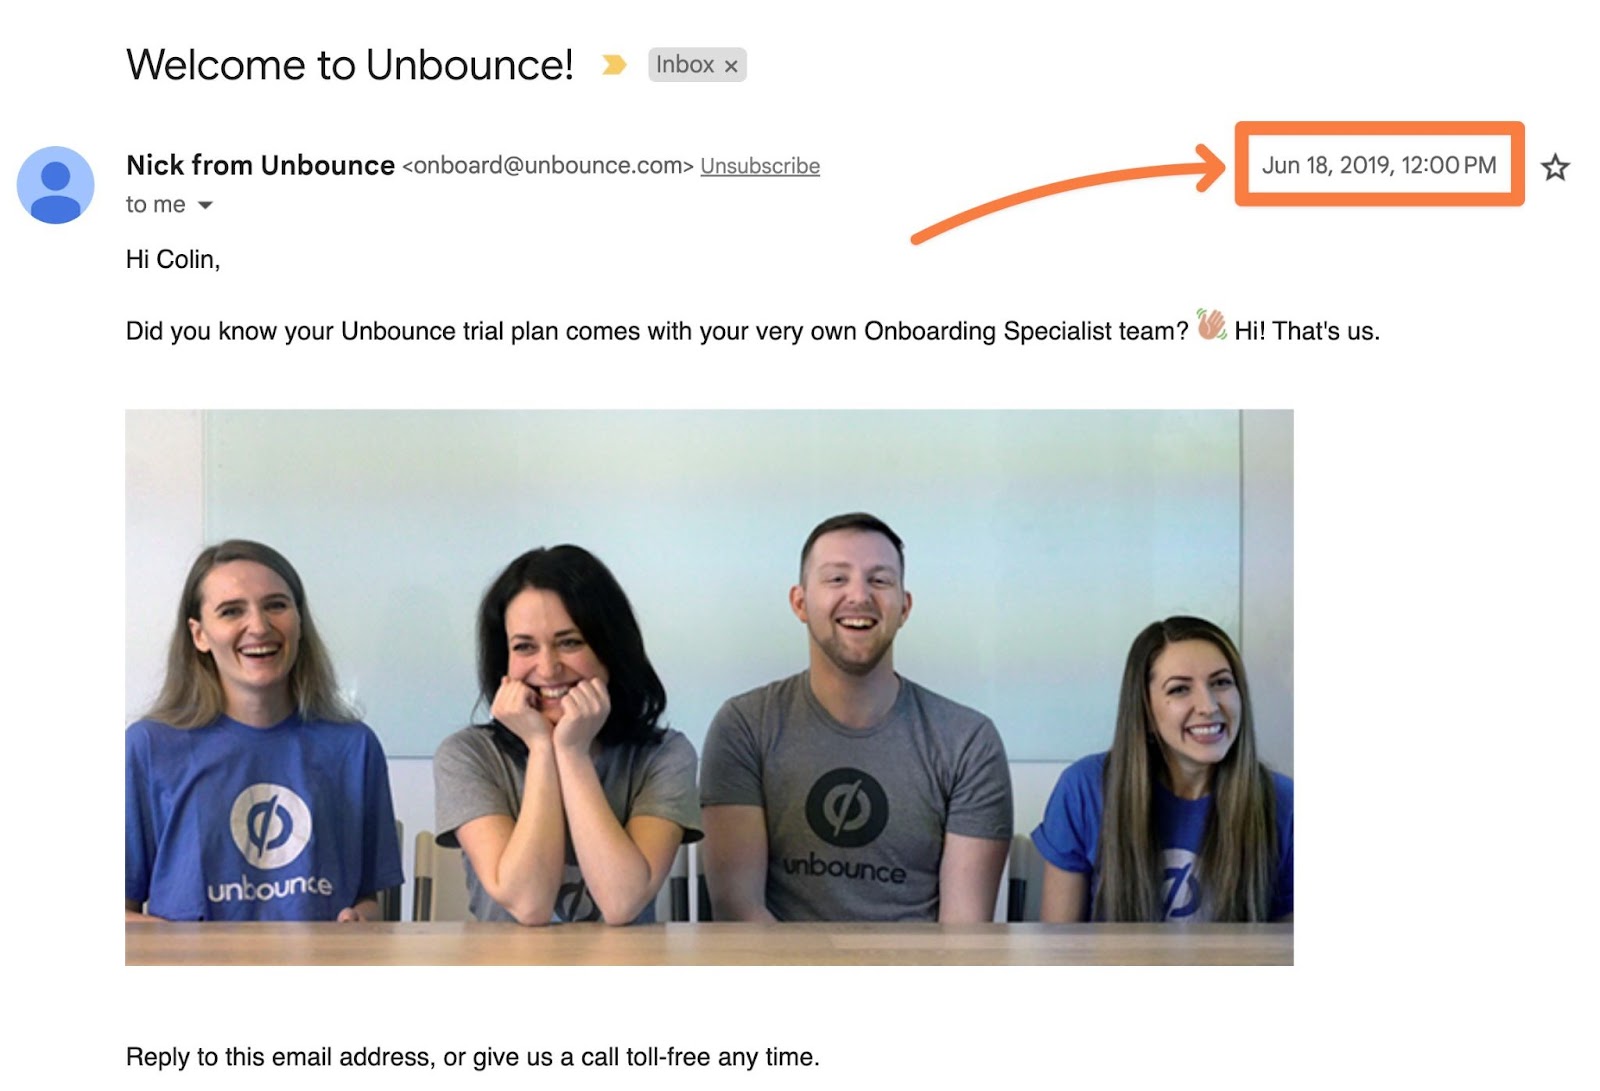 The author's Unbounce signup email from back in 2019